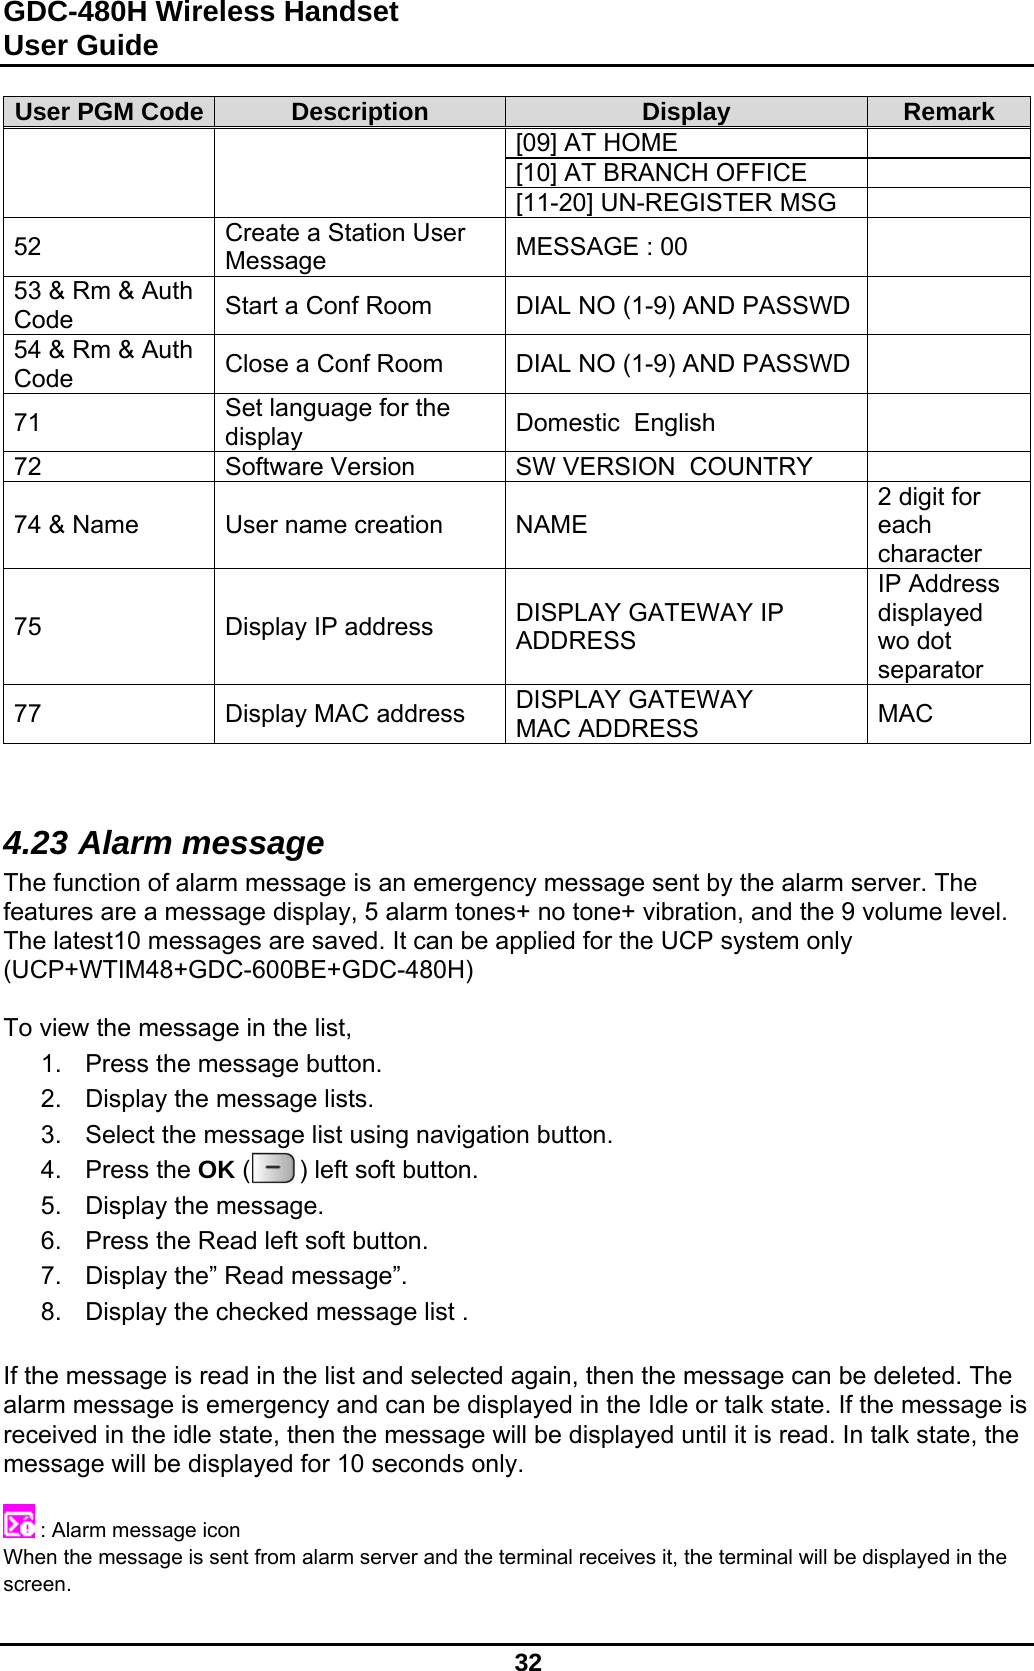 GDC-480H Wireless Handset User Guide   32  User PGM Code  Description  Display  Remark [09] AT HOME   [10] AT BRANCH OFFICE   [11-20] UN-REGISTER MSG   52  Create a Station User Message  MESSAGE : 00   53 &amp; Rm &amp; Auth Code  Start a Conf Room  DIAL NO (1-9) AND PASSWD   54 &amp; Rm &amp; Auth Code  Close a Conf Room  DIAL NO (1-9) AND PASSWD   71  Set language for the display  Domestic  English   72  Software Version  SW VERSION  COUNTRY   74 &amp; Name  User name creation  NAME 2 digit for each character  75  Display IP address  DISPLAY GATEWAY IP ADDRESS IP Address displayed wo dot separator 77  Display MAC address  DISPLAY GATEWAY  MAC ADDRESS  MAC    4.23 Alarm message The function of alarm message is an emergency message sent by the alarm server. The features are a message display, 5 alarm tones+ no tone+ vibration, and the 9 volume level. The latest10 messages are saved. It can be applied for the UCP system only (UCP+WTIM48+GDC-600BE+GDC-480H)  To view the message in the list, 1.   Press the message button. 2.   Display the message lists. 3.   Select the message list using navigation button. 4.   Press the OK (       ) left soft button. 5.   Display the message. 6.   Press the Read left soft button. 7.   Display the” Read message”. 8.   Display the checked message list .  If the message is read in the list and selected again, then the message can be deleted. The alarm message is emergency and can be displayed in the Idle or talk state. If the message is received in the idle state, then the message will be displayed until it is read. In talk state, the message will be displayed for 10 seconds only.   : Alarm message icon  When the message is sent from alarm server and the terminal receives it, the terminal will be displayed in the screen.  